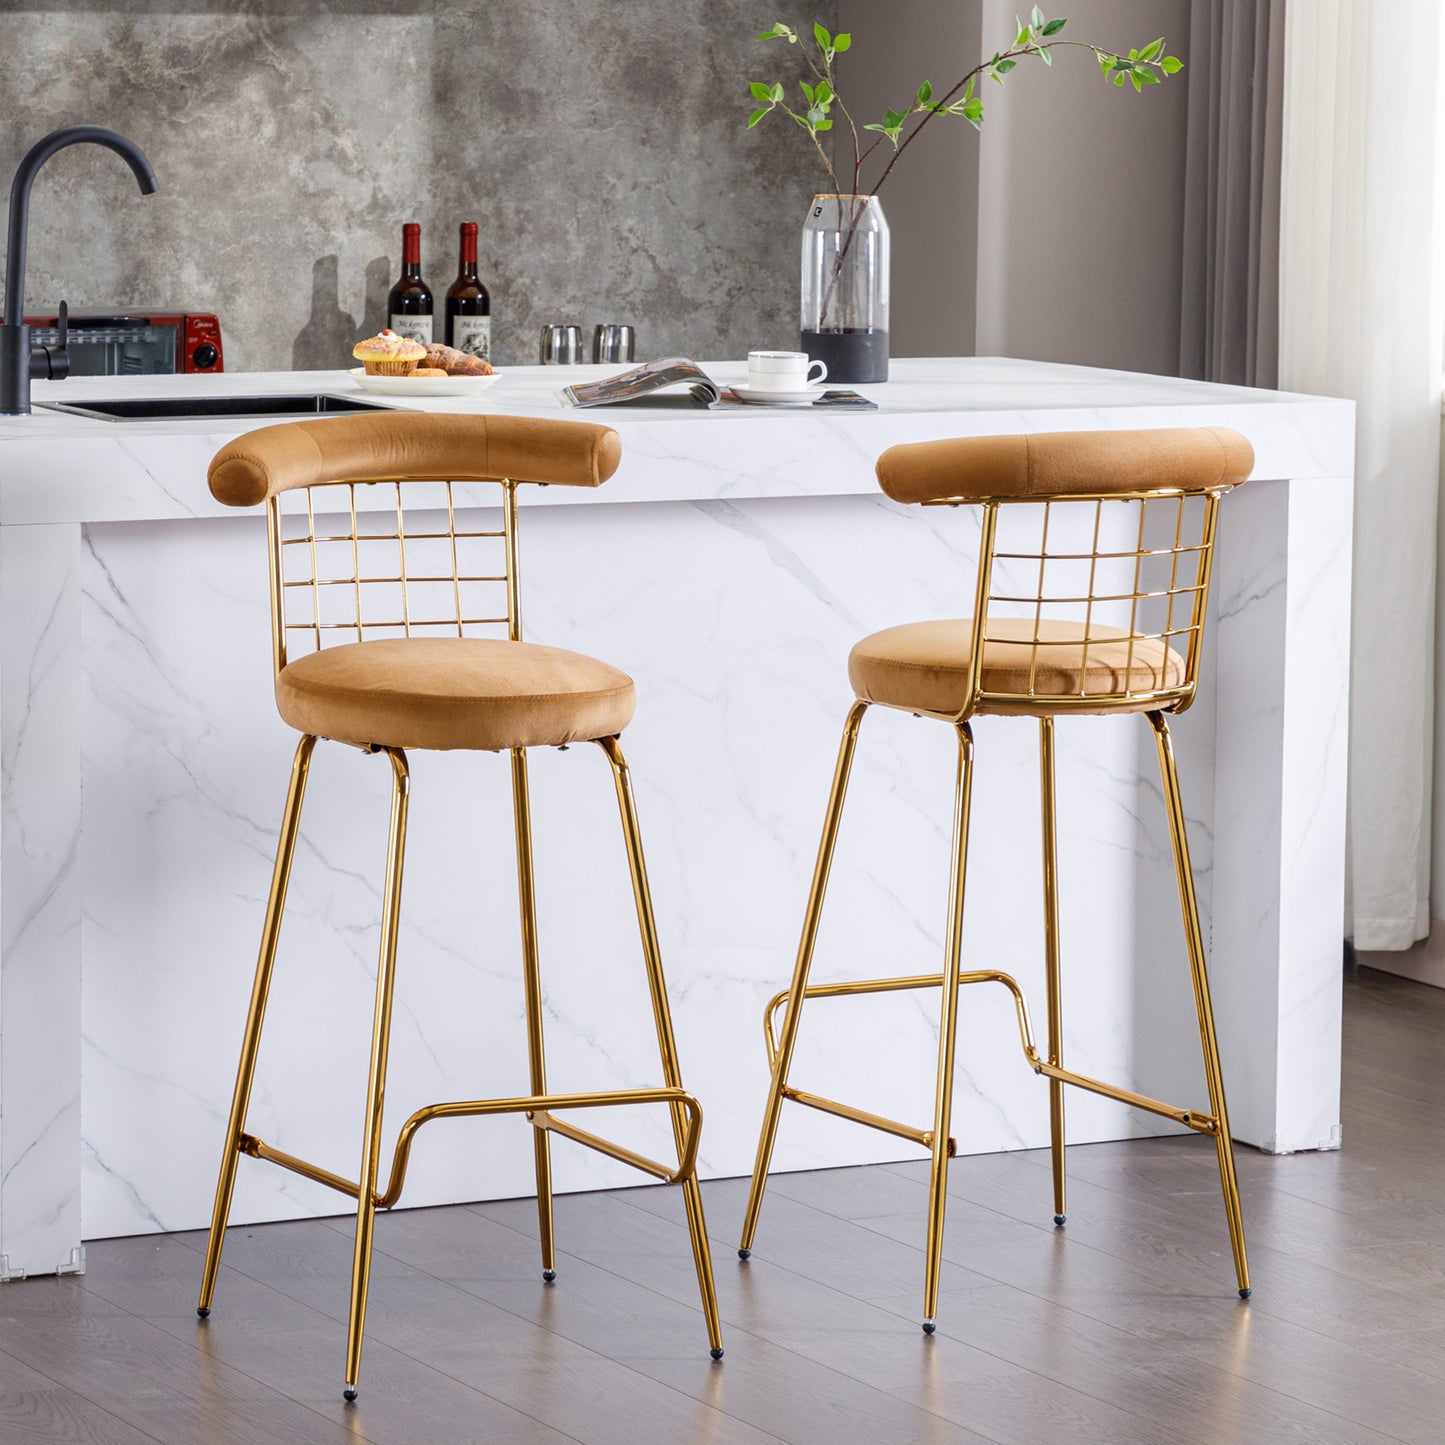 Bar Stool Set of 2, Luxury Velvet High Bar Stool with Metal Legs and Soft Back, Pub Stool Chairs Armless Modern Kitchen High Dining Chairs with Metal Legs, Camel